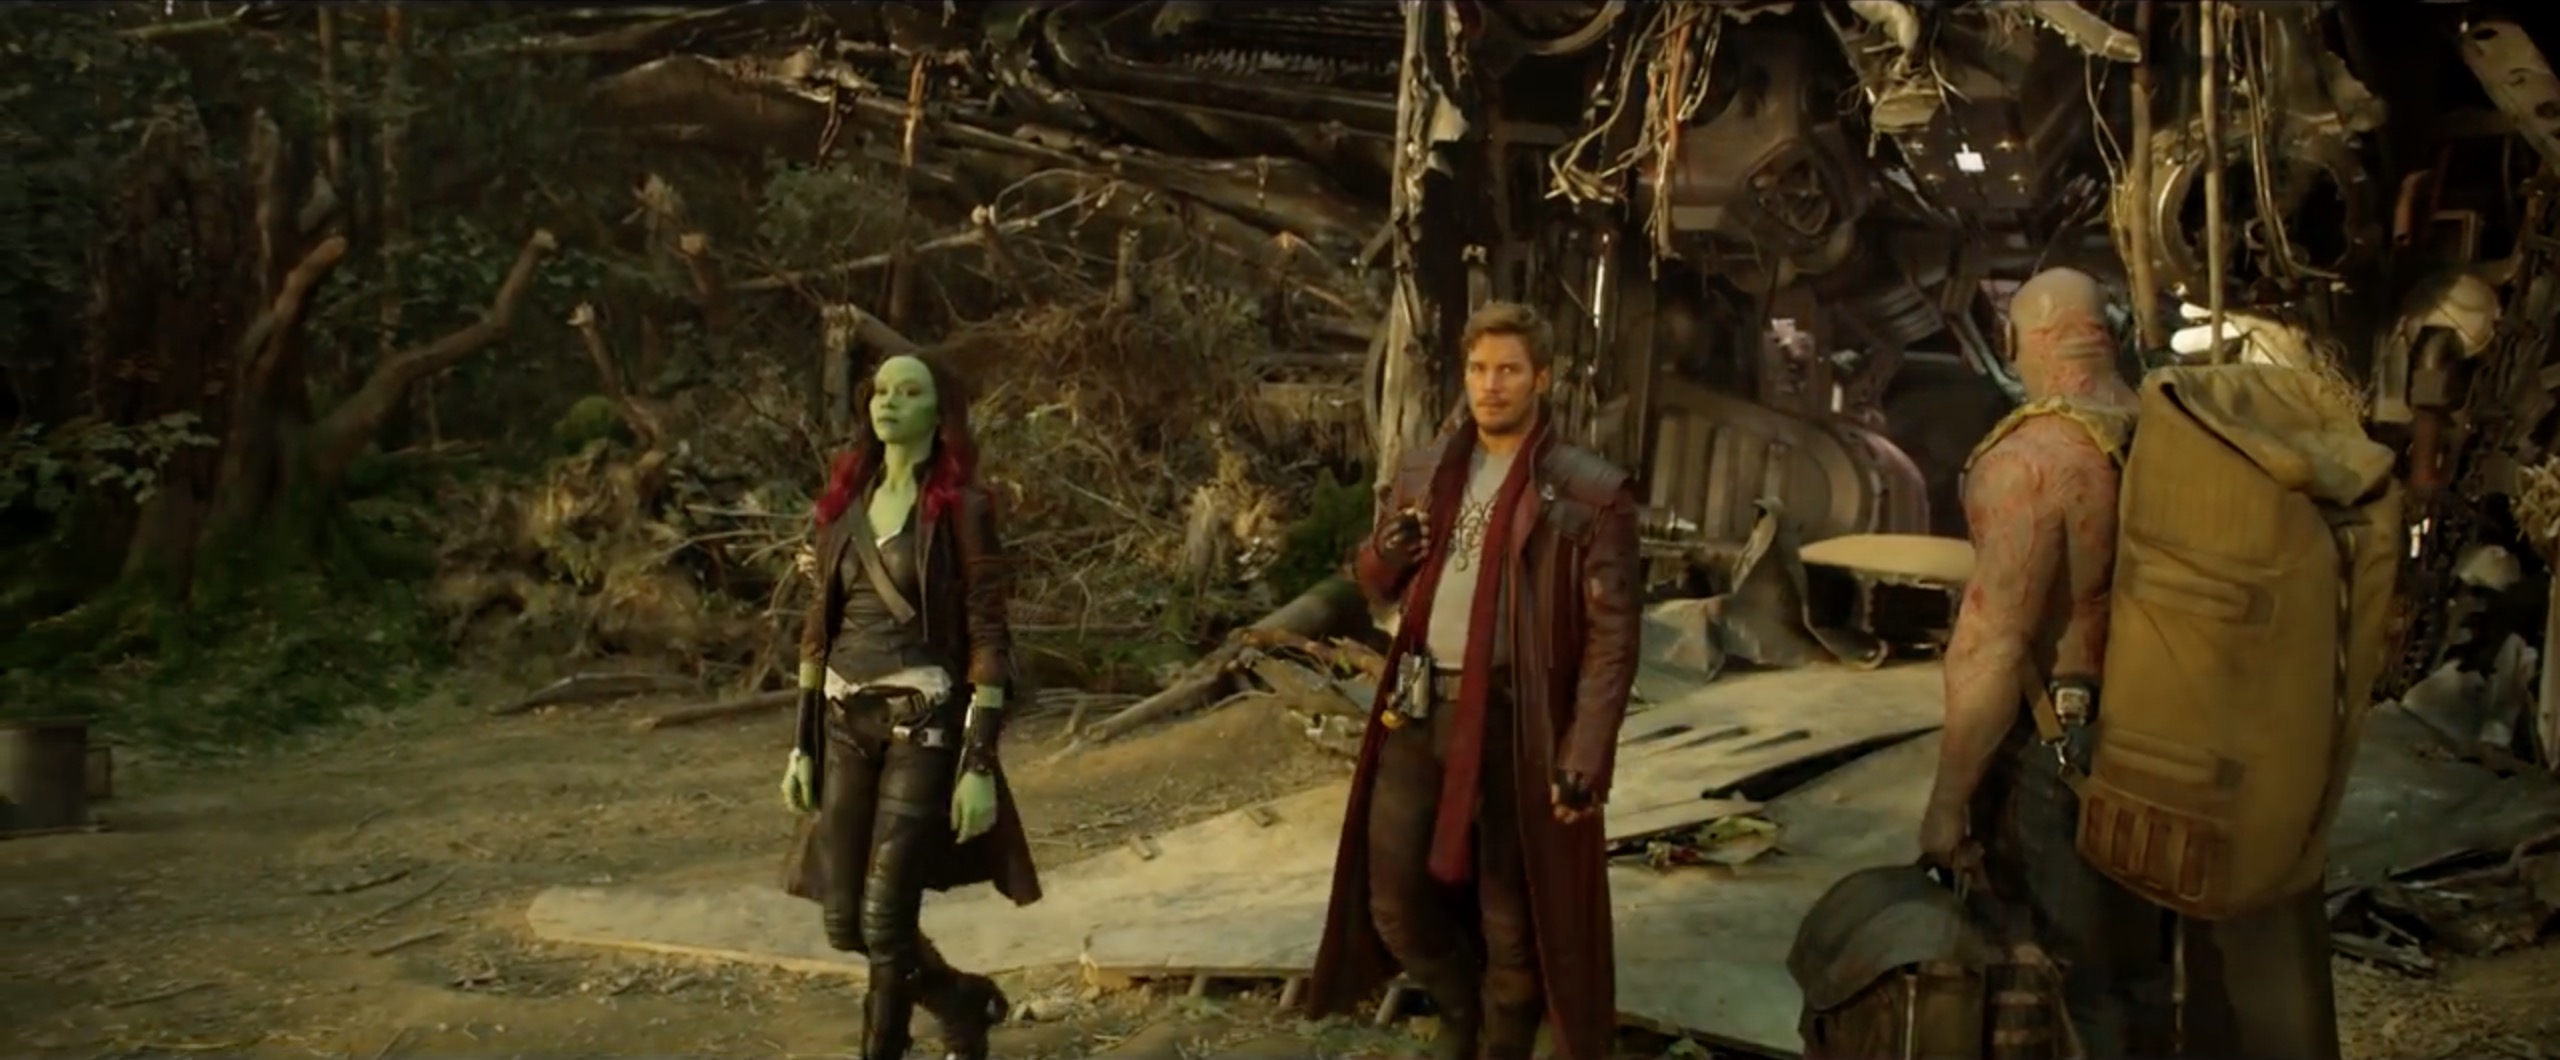 Guardians' Vs. 'Avengers': 'Vol. 2' Could Top 'Age of Ultron' on